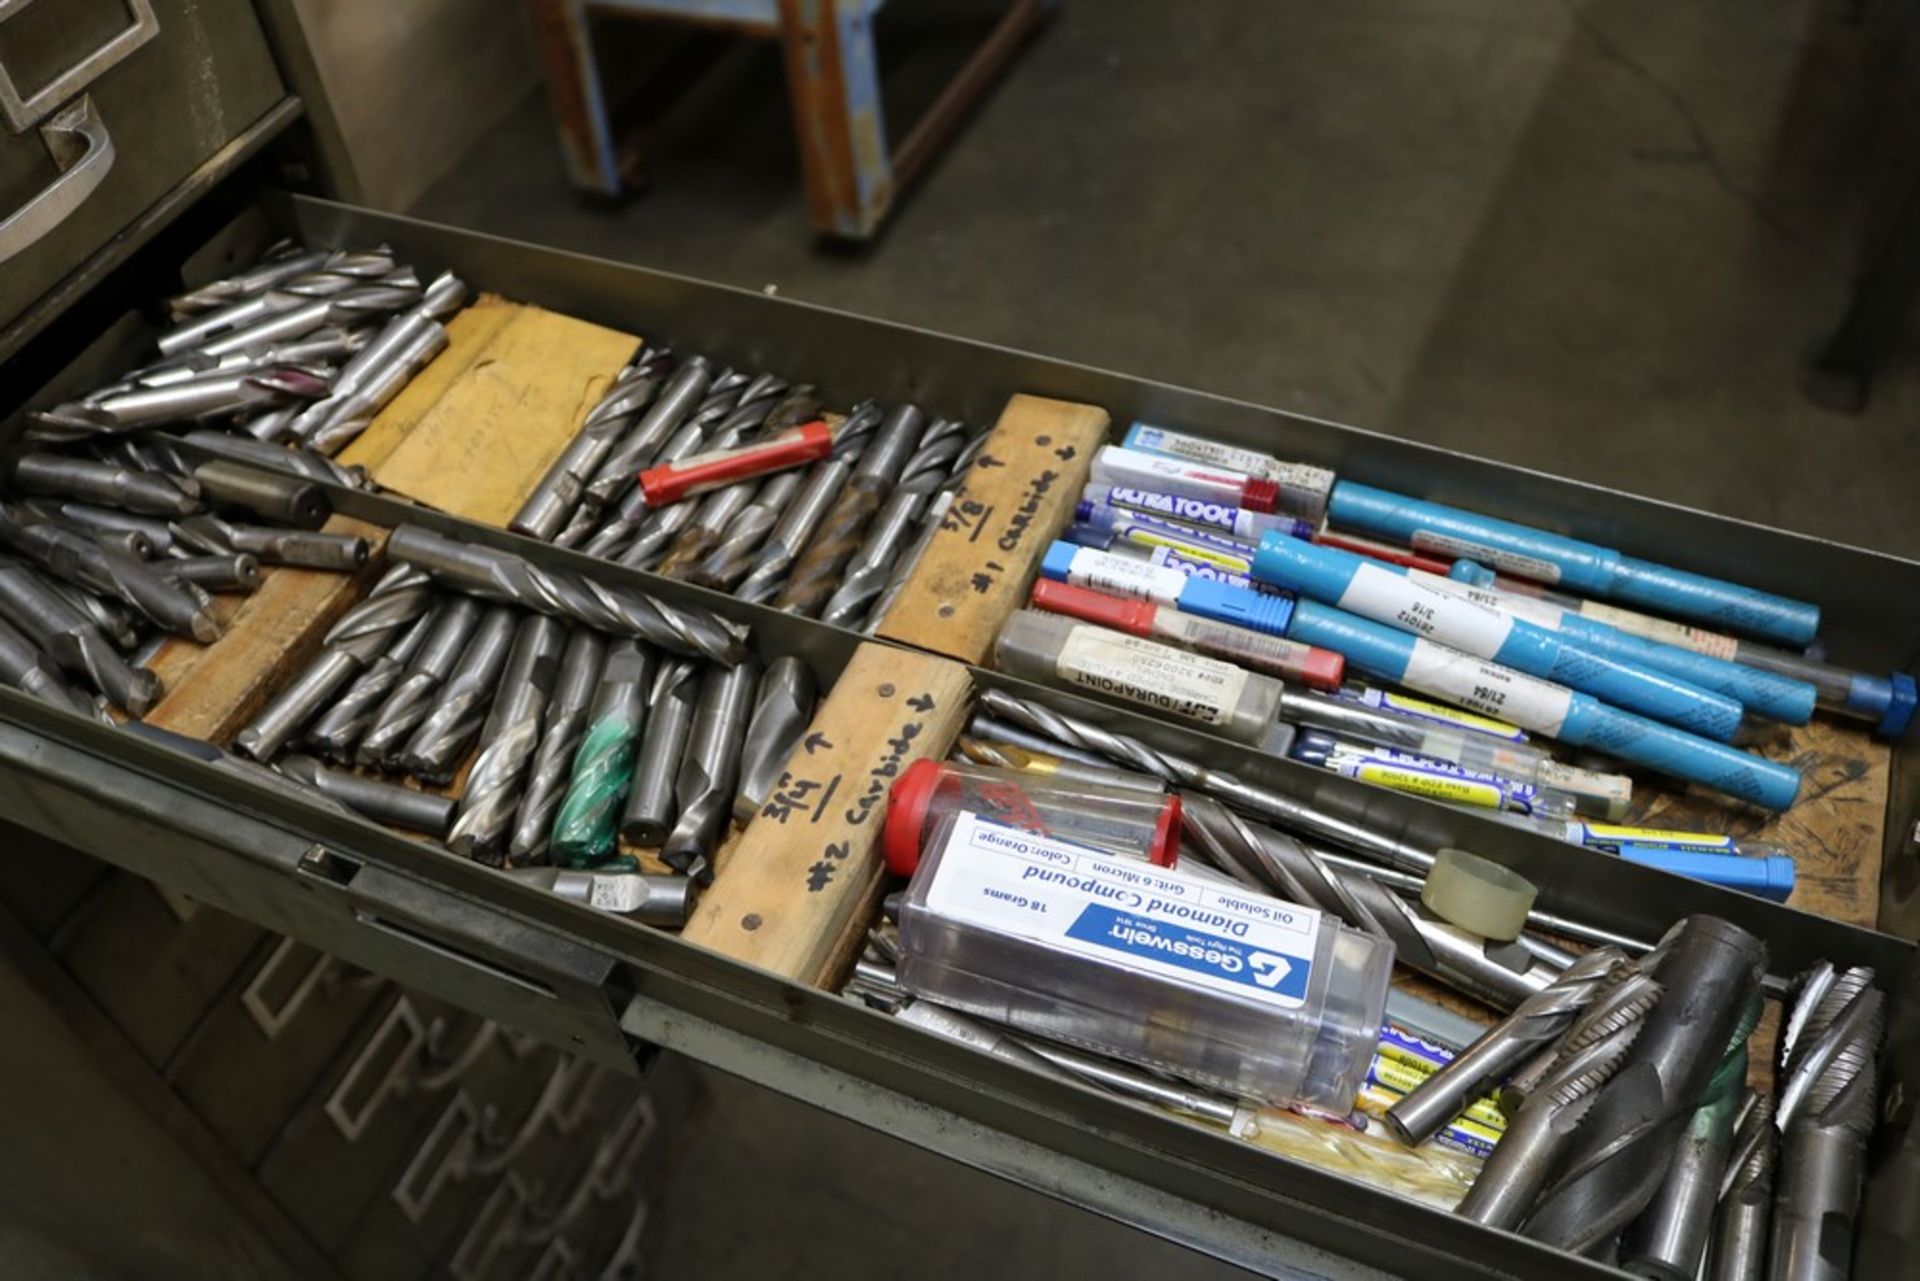 11 Drawer Metal Tooling Cabinet Full of New and Used Tooling, End Mills, Counter Sinks, Threading - Image 7 of 13